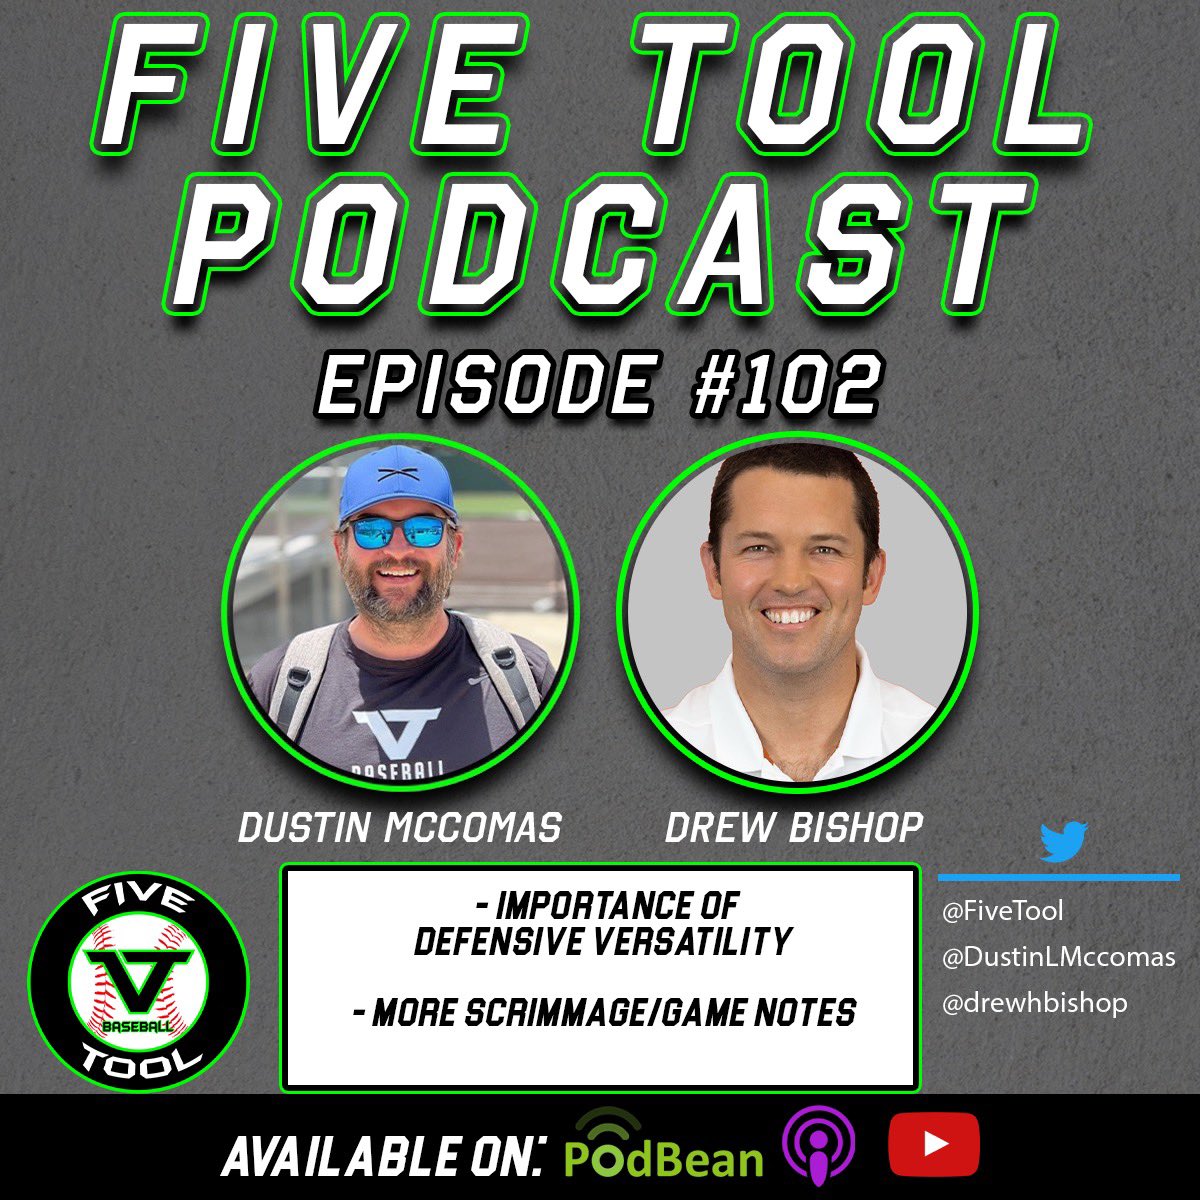 Episode 1️⃣0️⃣2️⃣ of the @FiveTool Podcast

With: @DustinLMcComas & @drewhbishop 

Mentions: @AHoward24_ @AidanColeman_24 @AidenMcNulty1 @aiden_white22 @andrewermis3 + more!

🤔Importance of defensive versatility and more scrimmage/game notes

🎧LISTEN: fivetool.org/podcasts